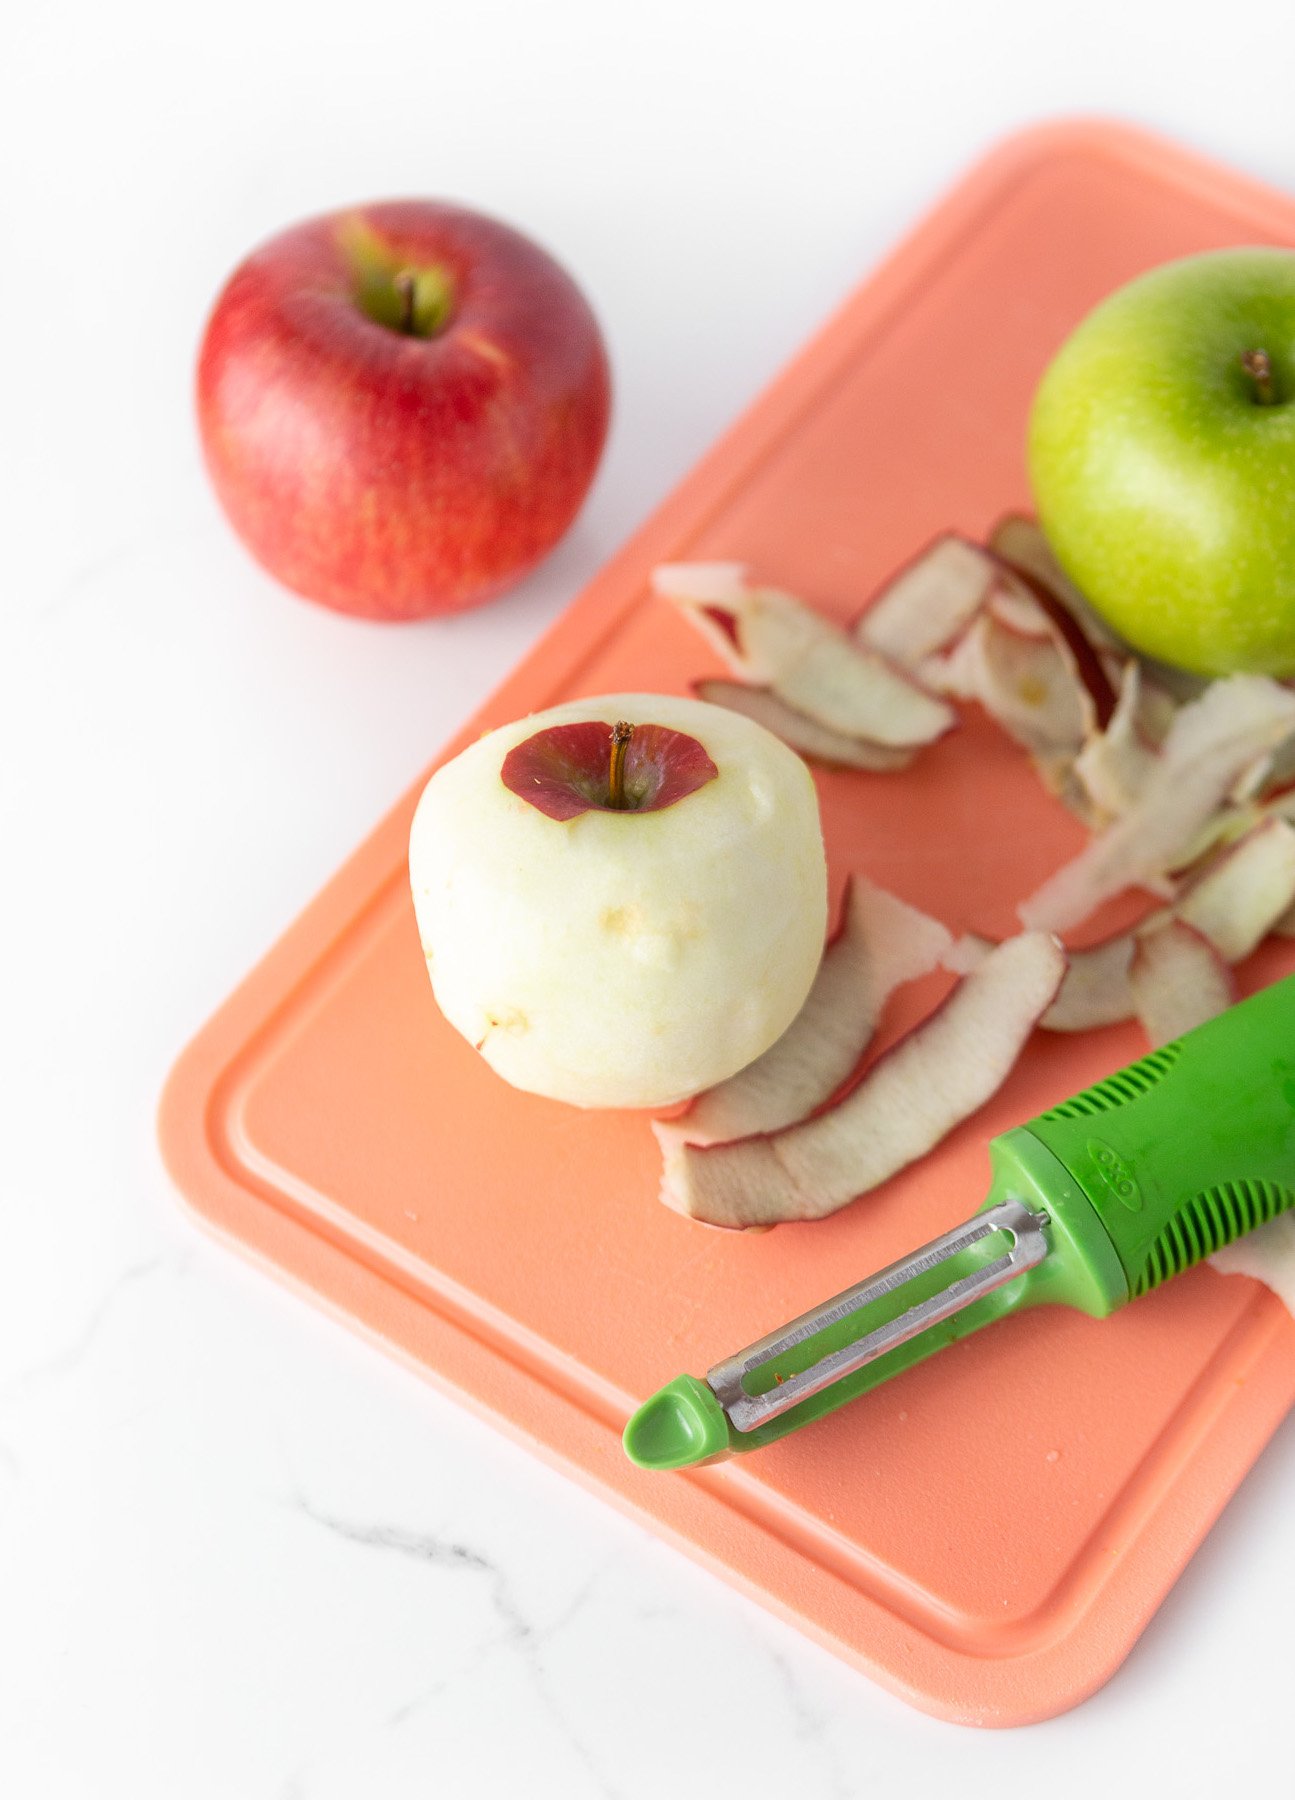 Pink cutting board peeling red and green apples